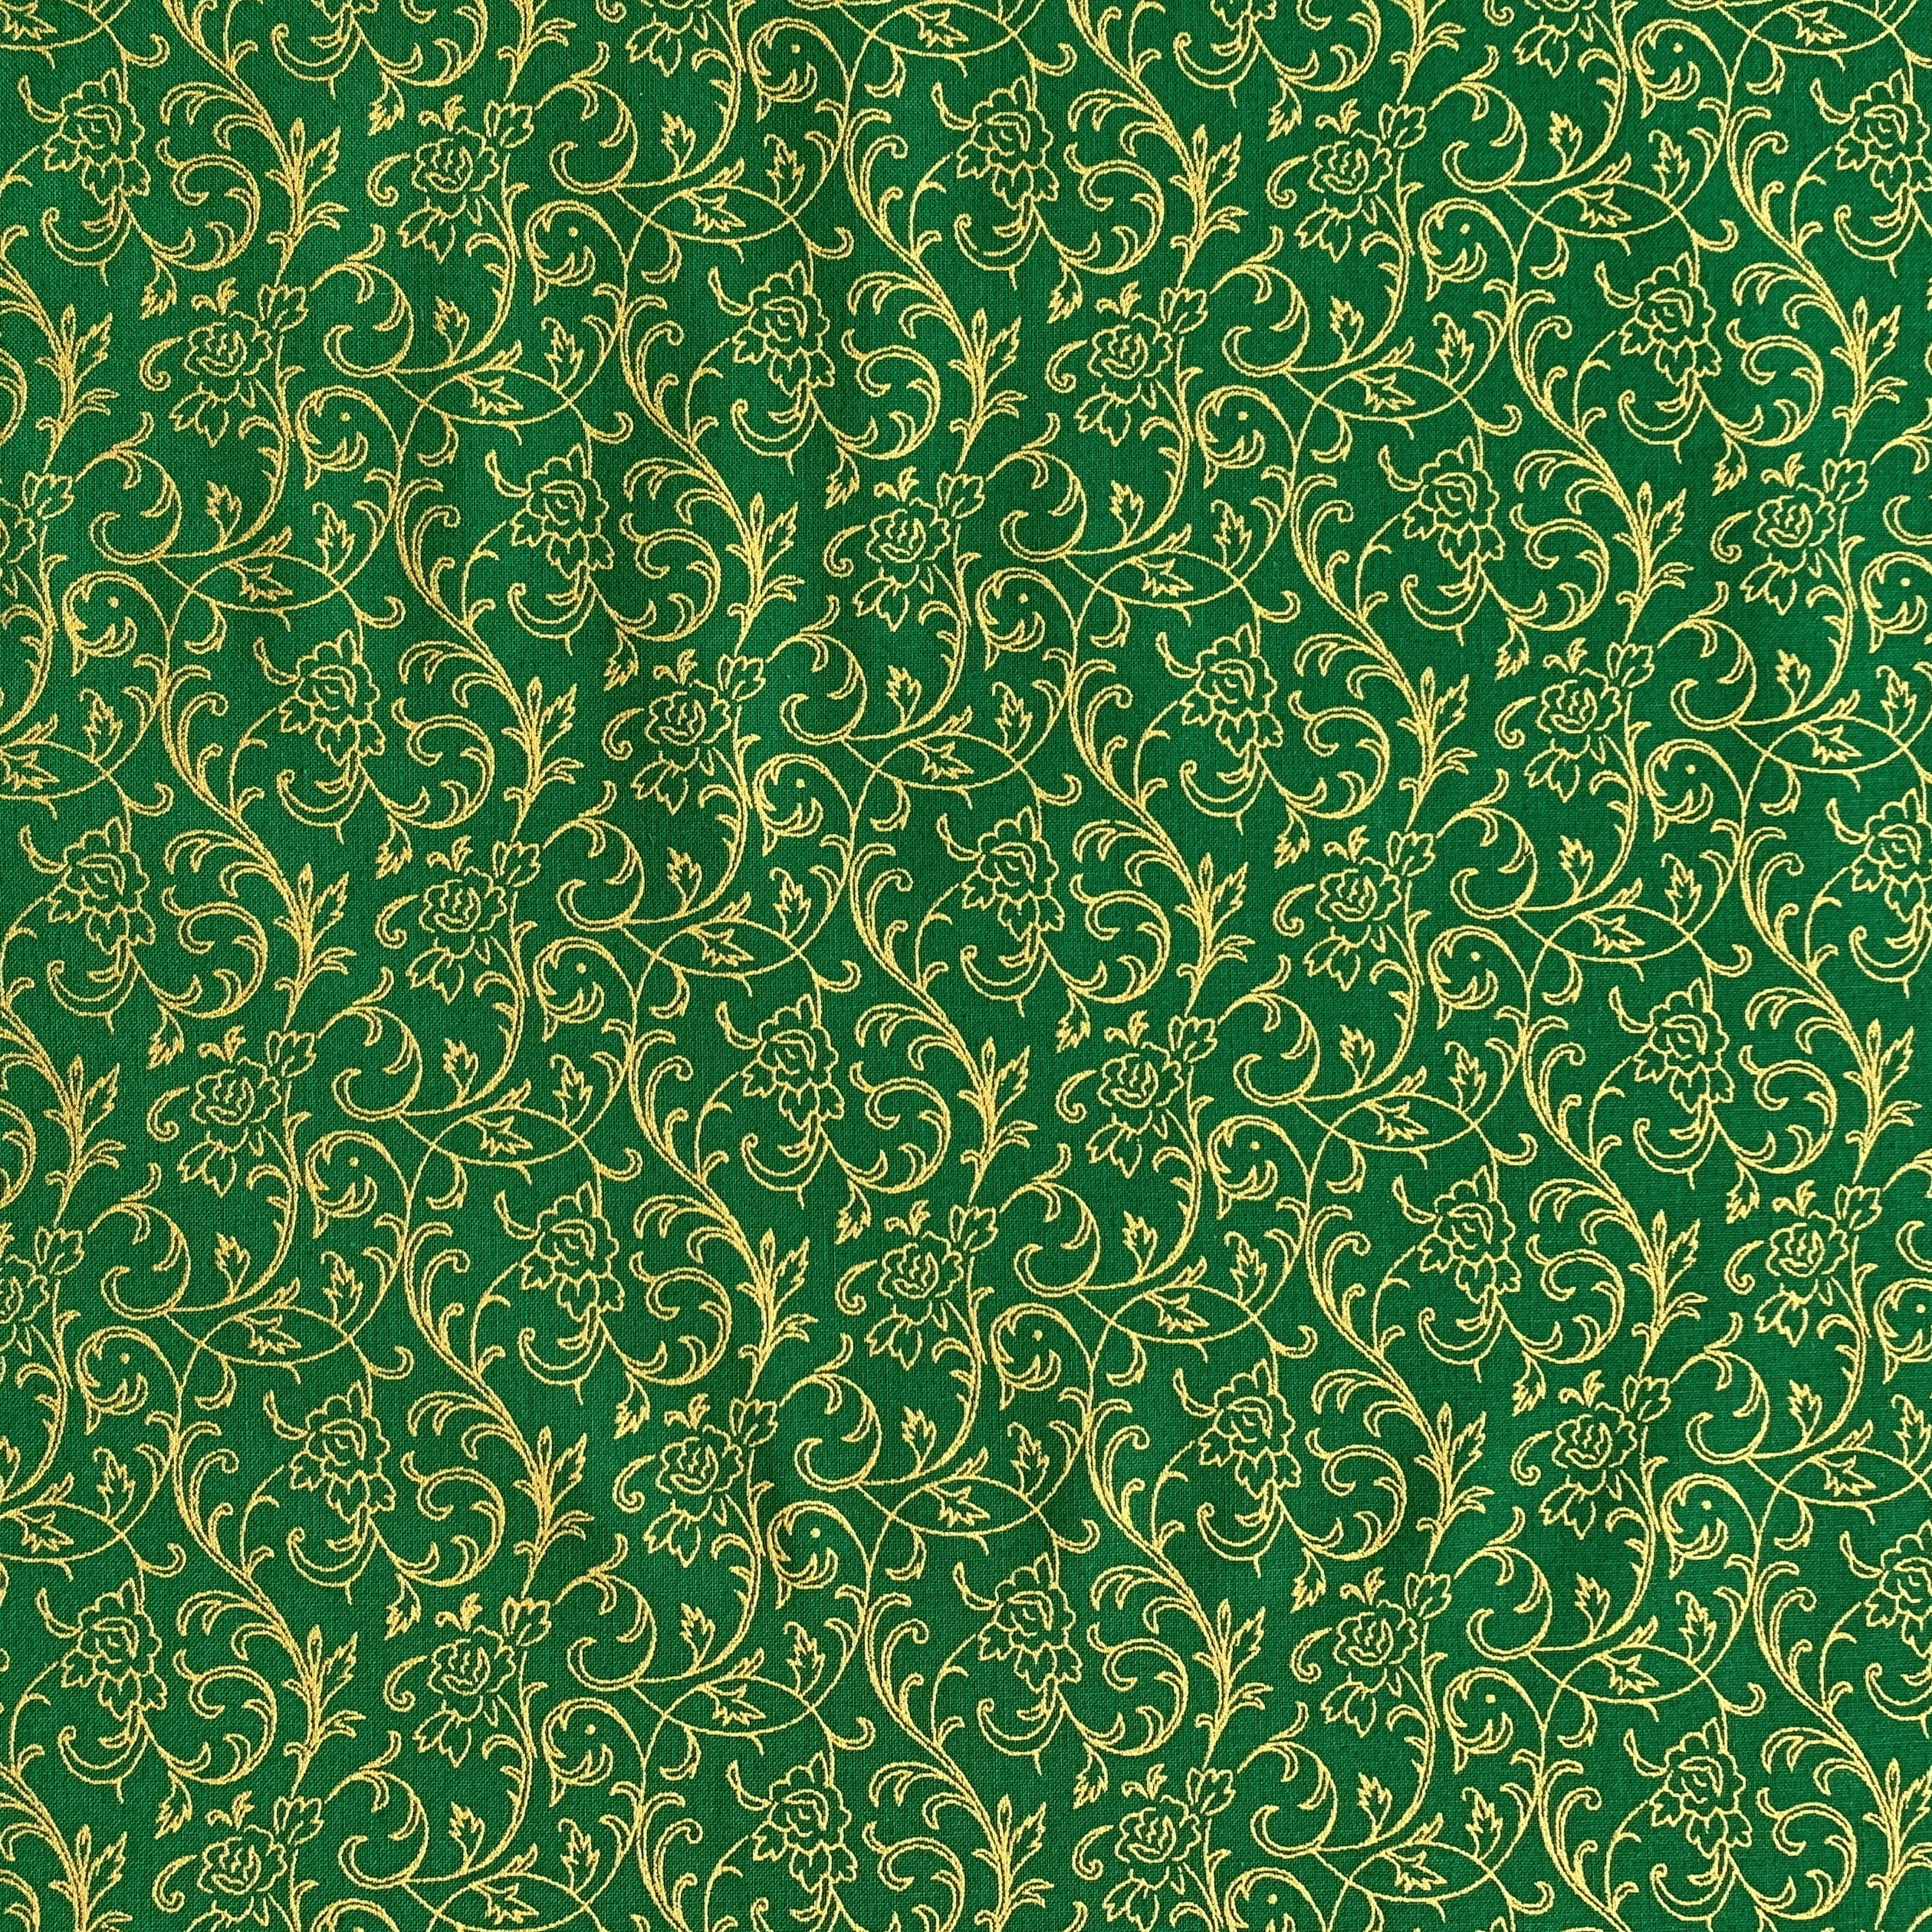 Damask Tapestry Chenille Fabric Upholstery Fabric, Olive Green / Gold 60  Width Sold by Yard in Continuous Yards 